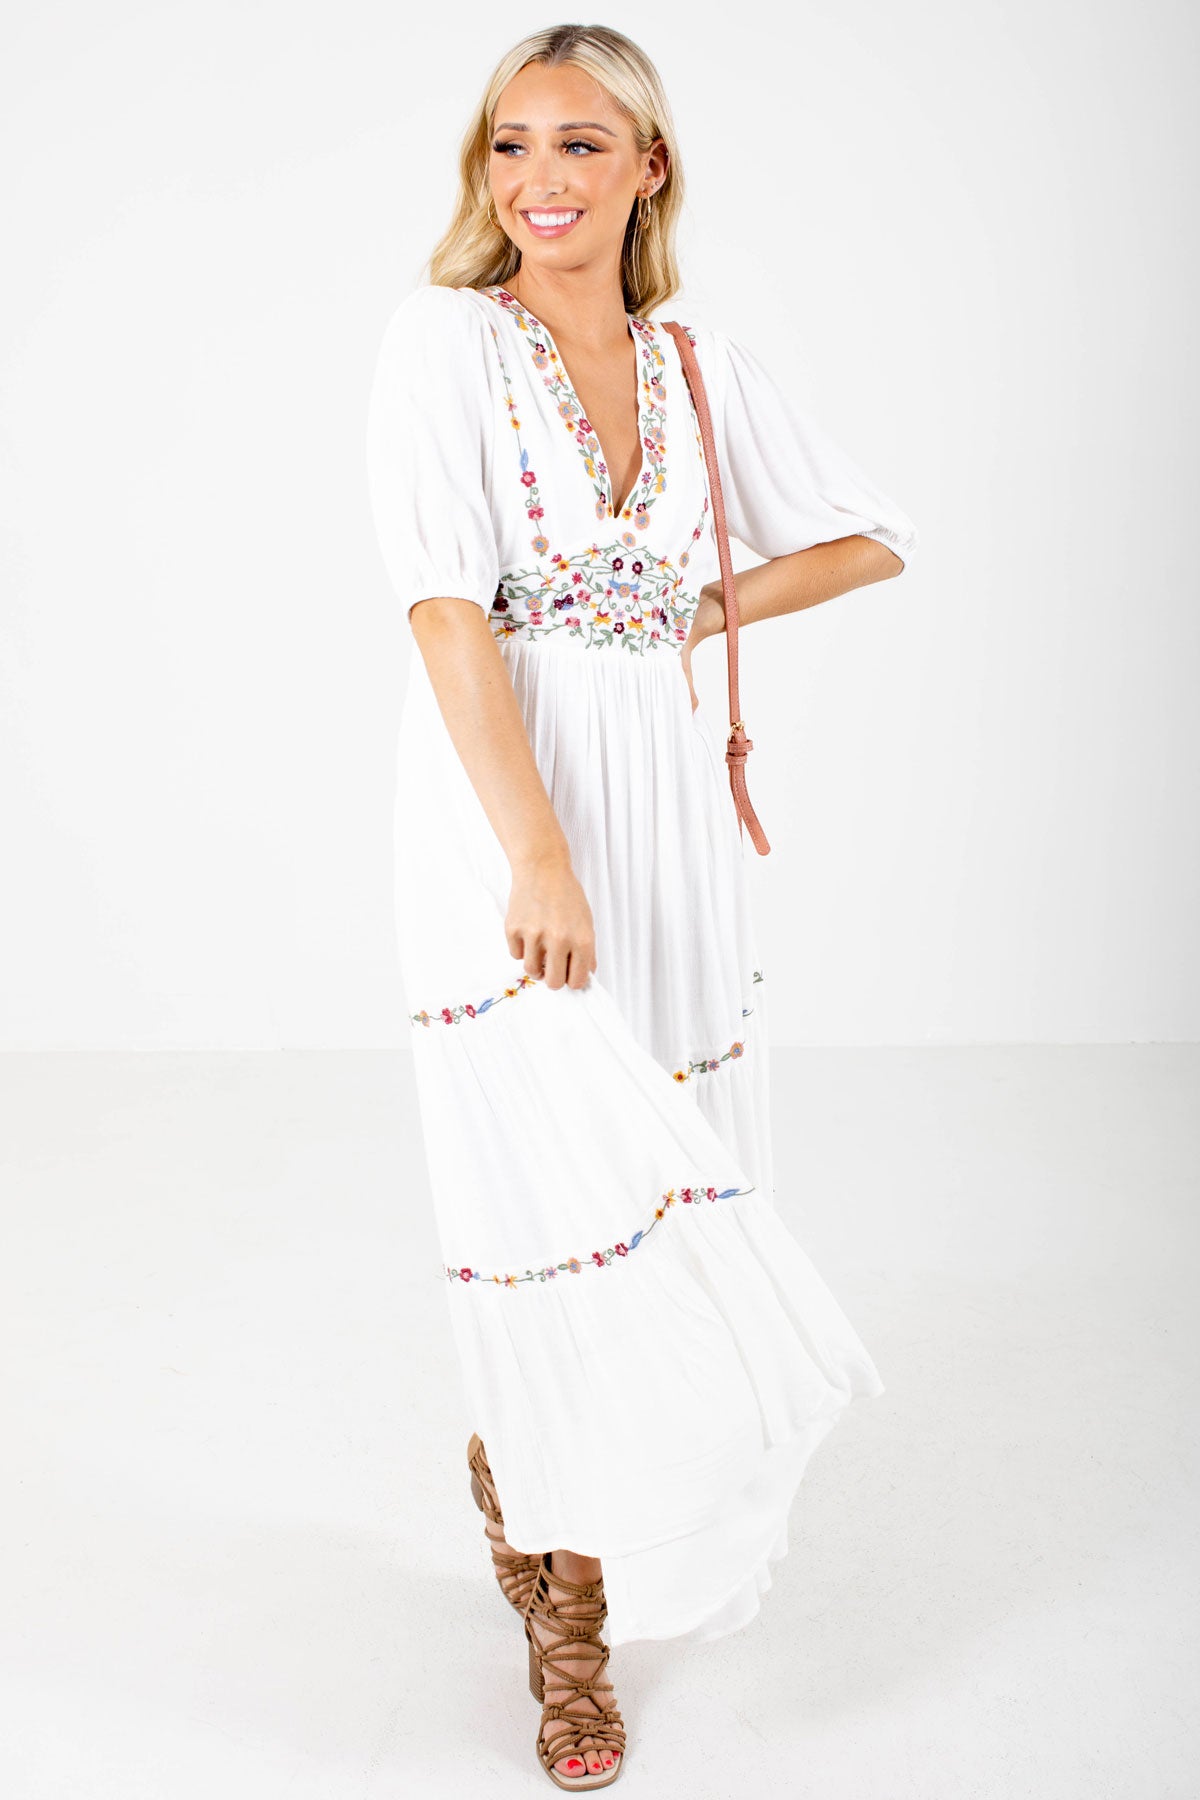 White Cute and Comfortable Boutique Maxi Dresses for Women